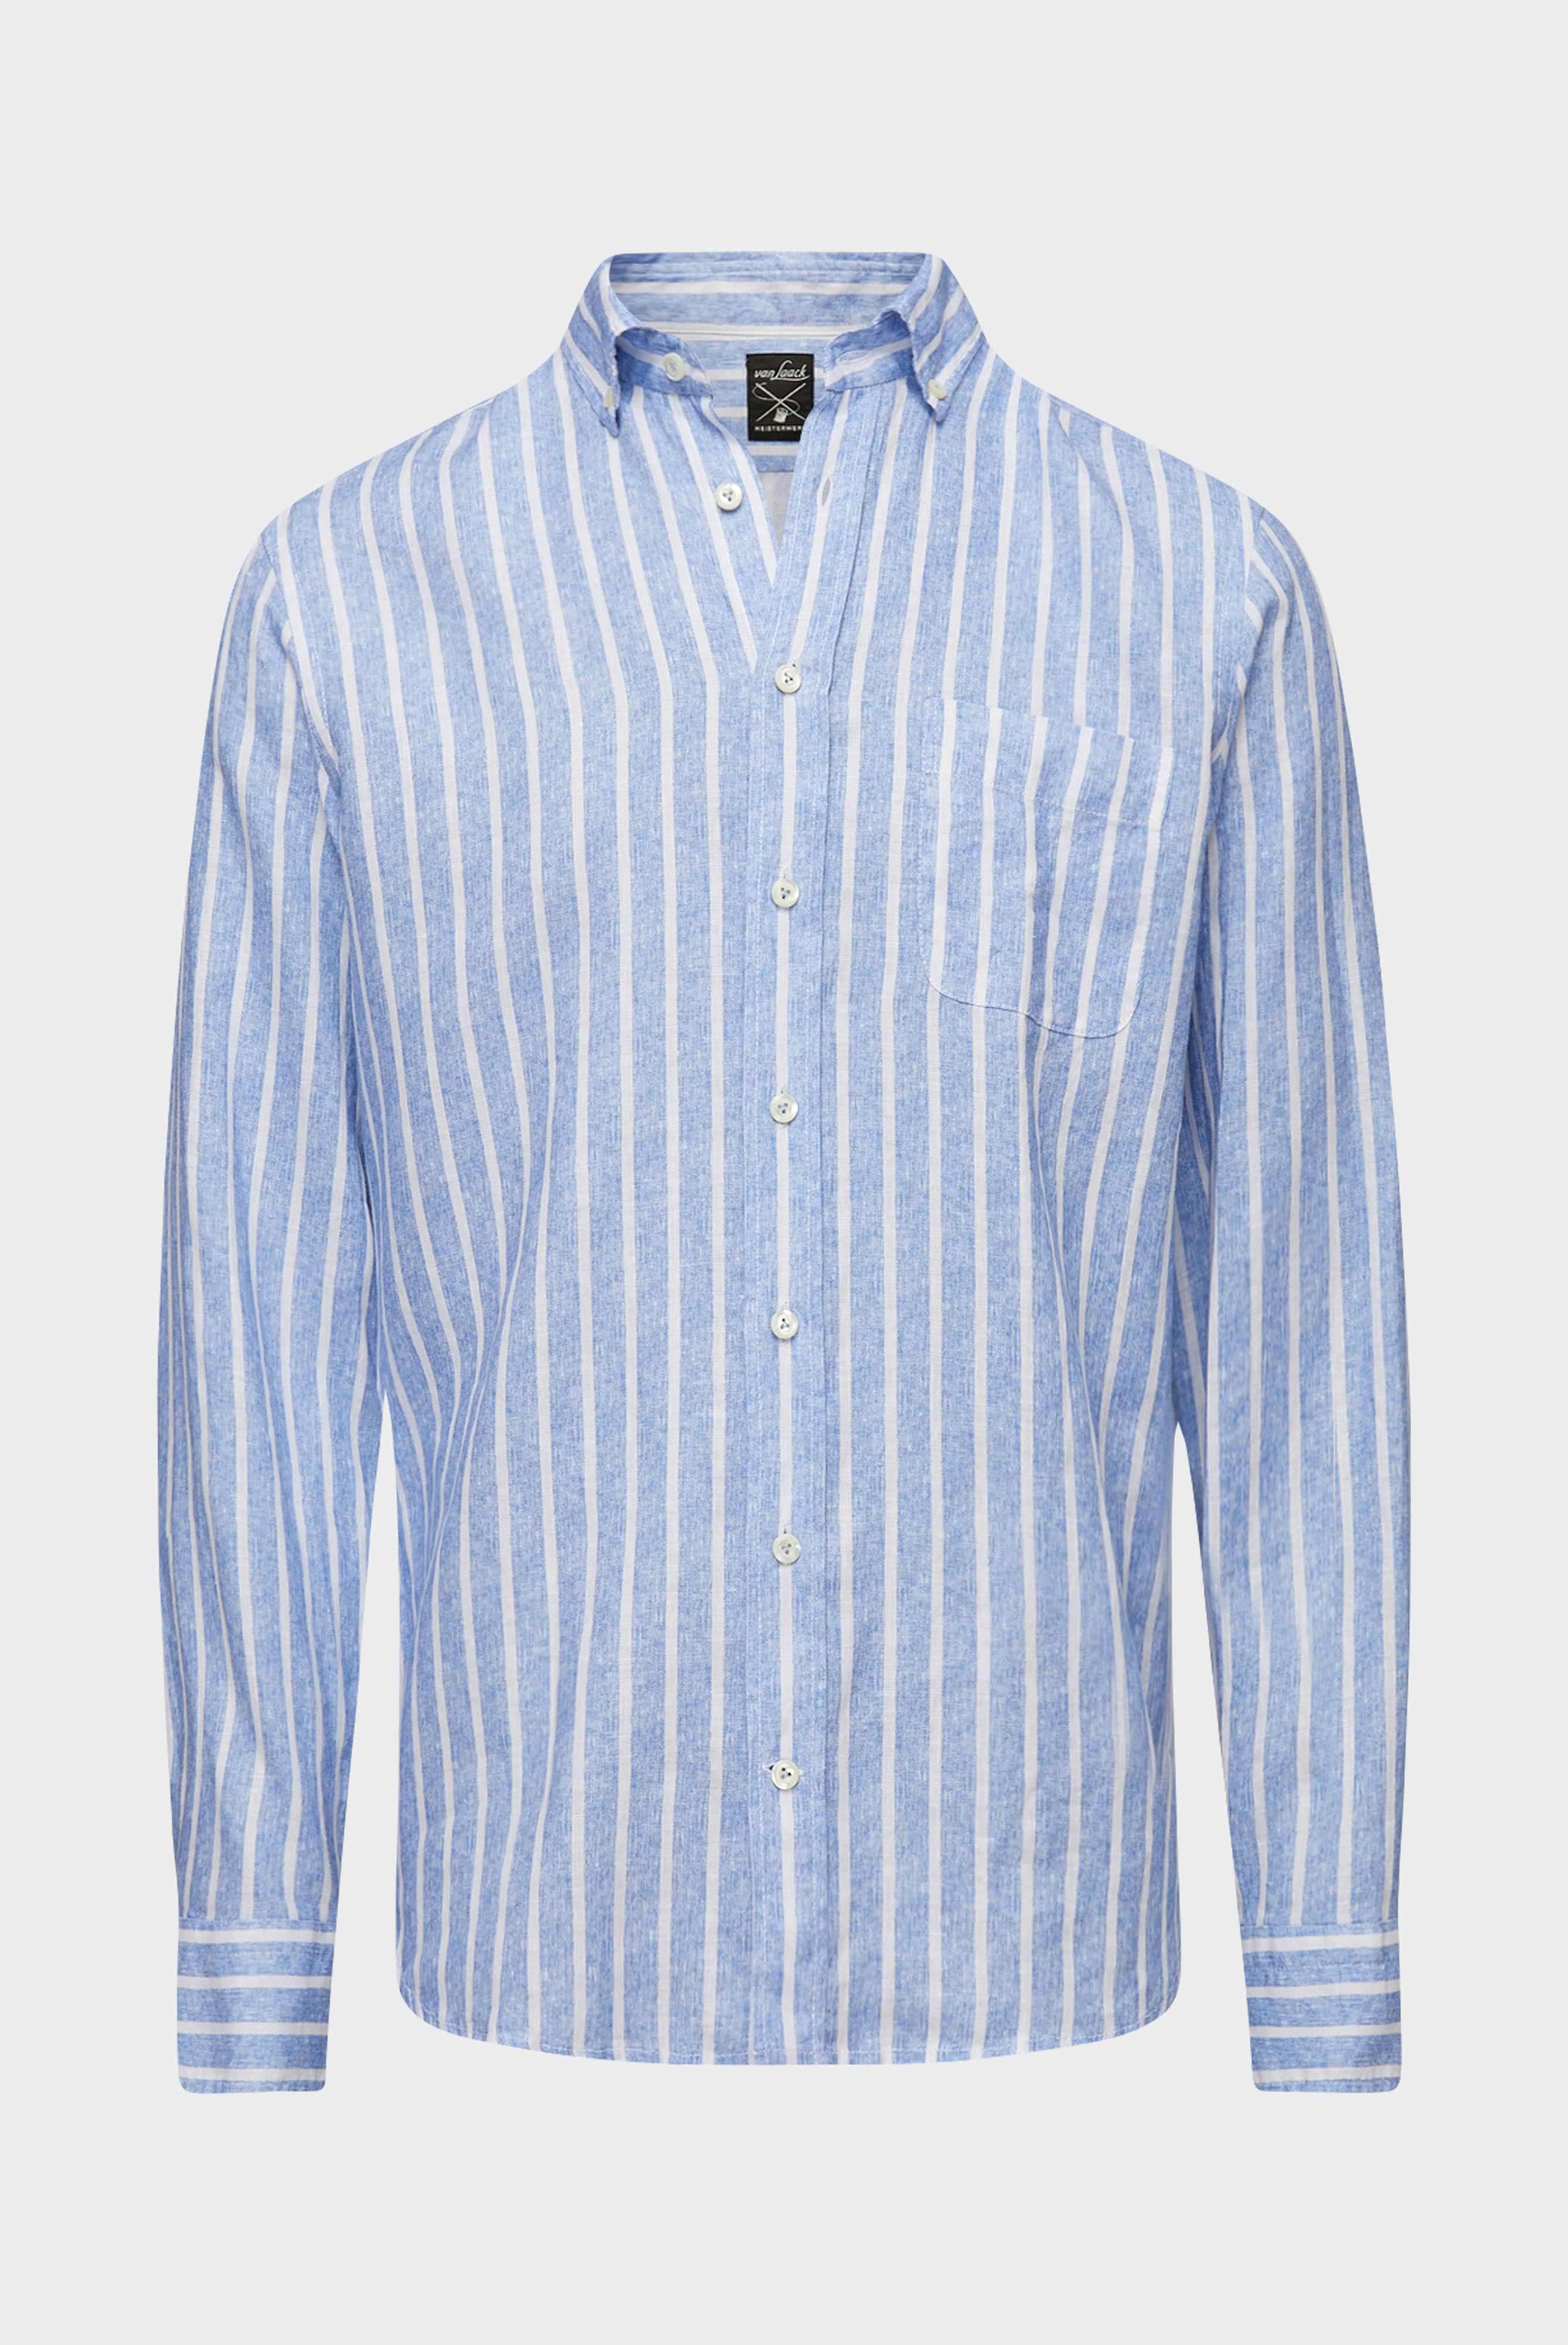 Casual Shirts+Linen button-down hem with stripe print+20.2013.MB.170238.760.38